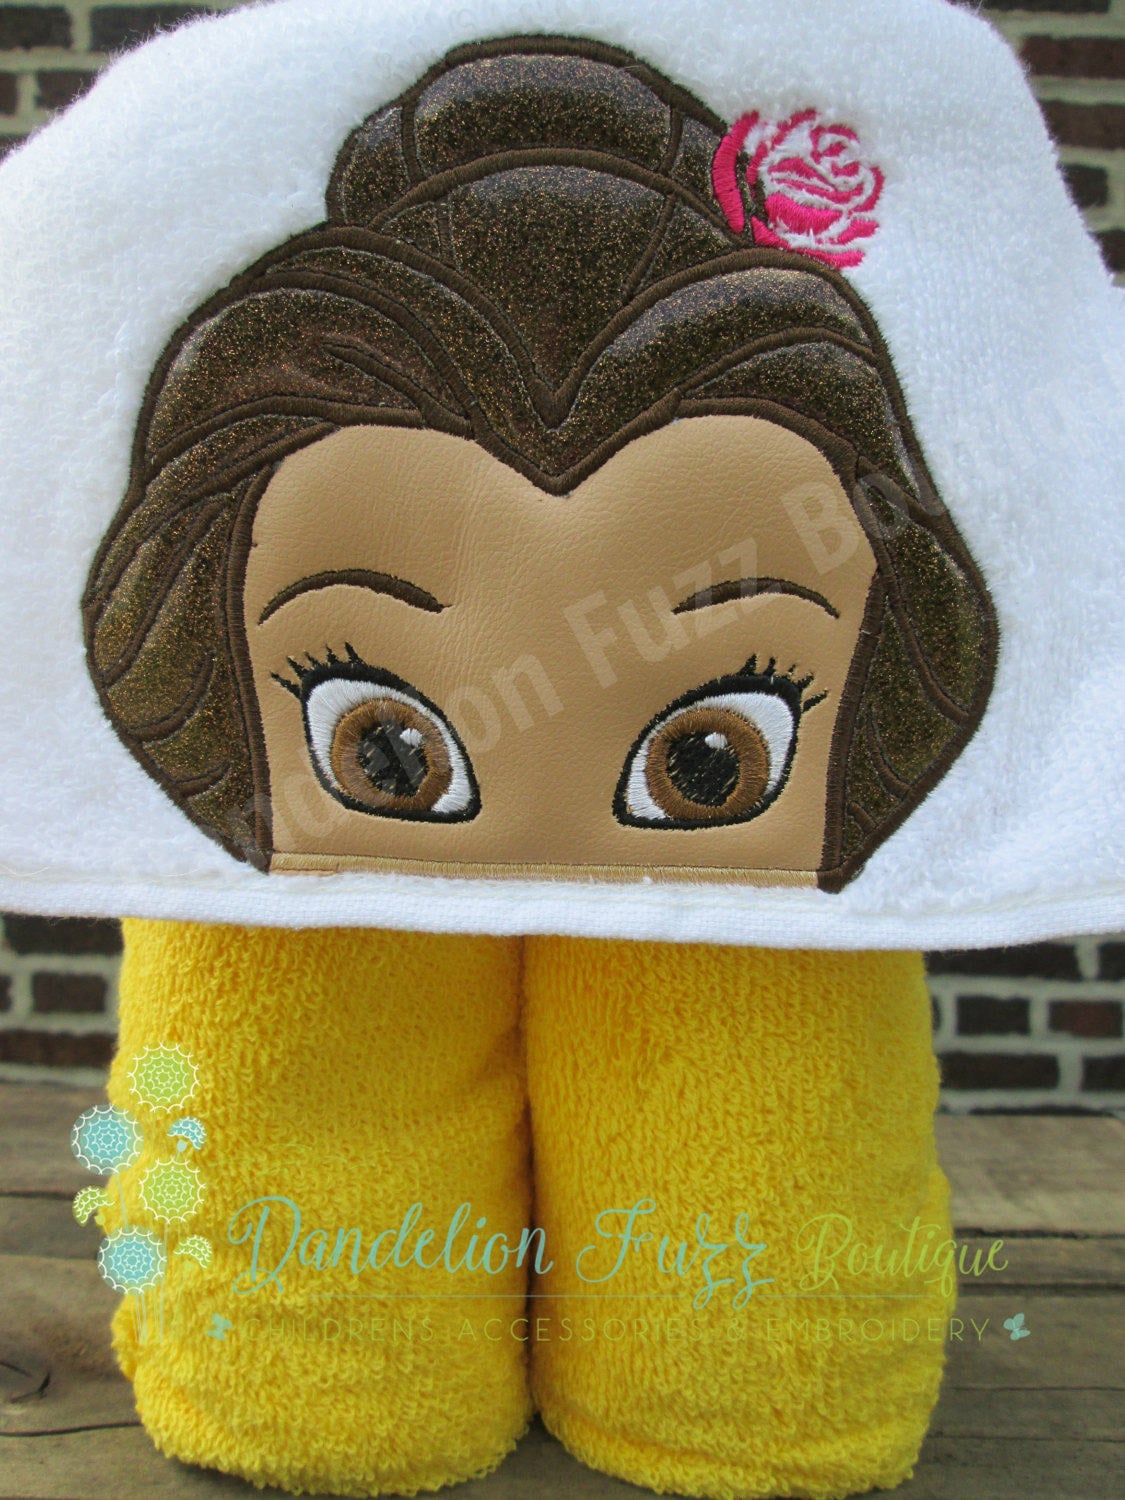 Rose Princess Hooded Towel, Beach Towel, Pool Towel, Beauty and the Beast Birthday, Beauty and the Beast Gift, Present, Baby Towel